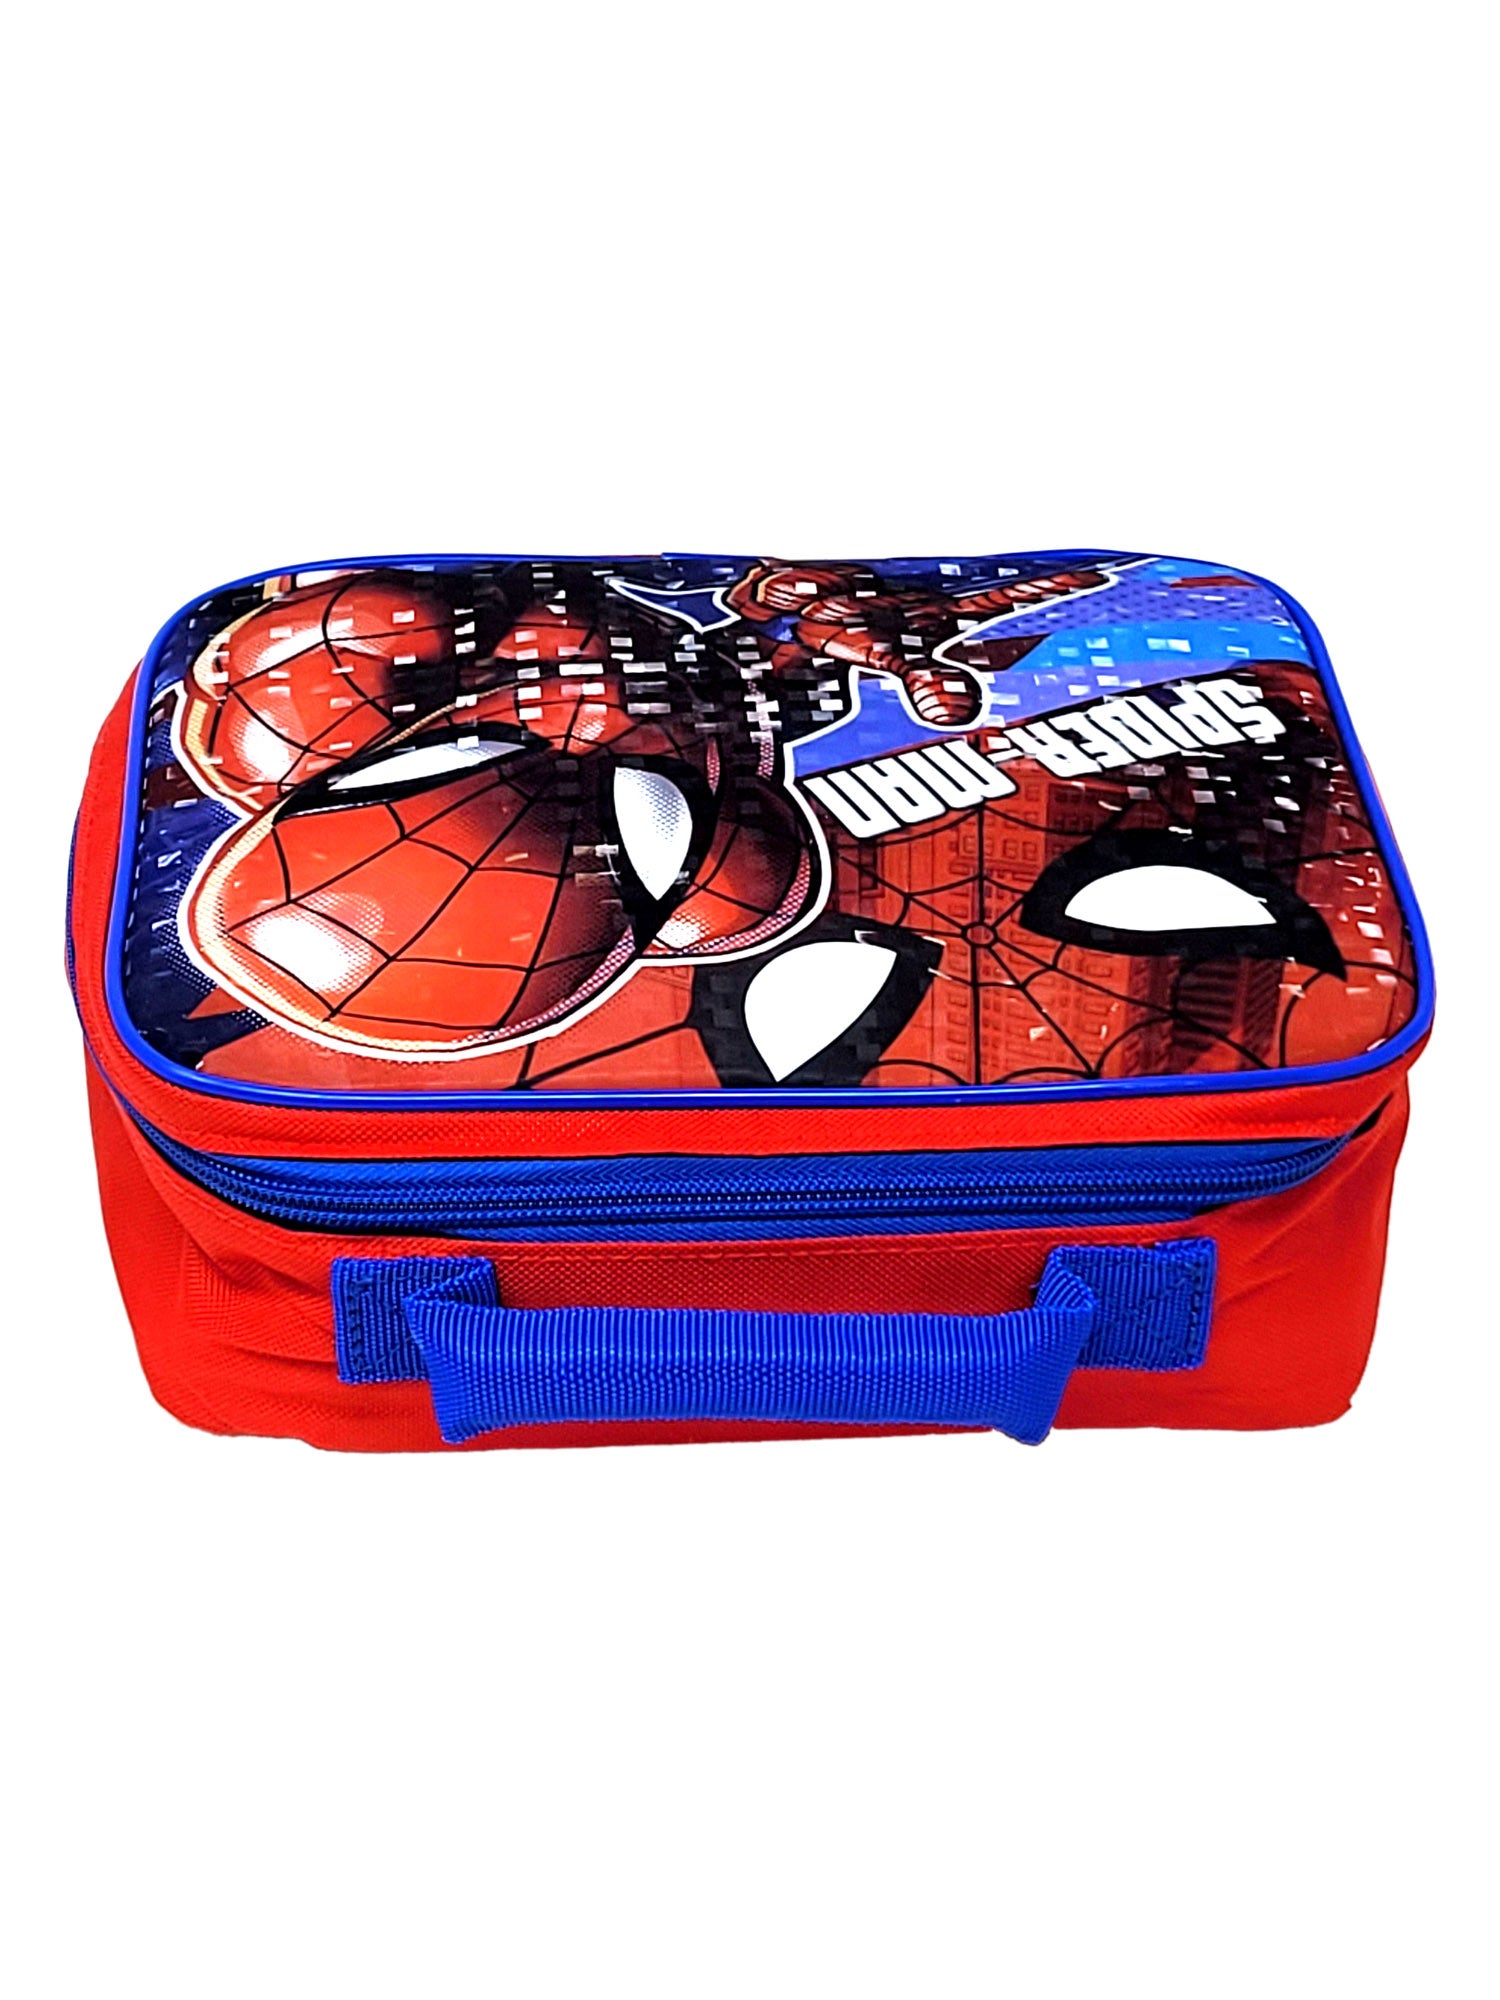 Marvel Spider-Man Insulated Lunch Bag Superhero Red Blue